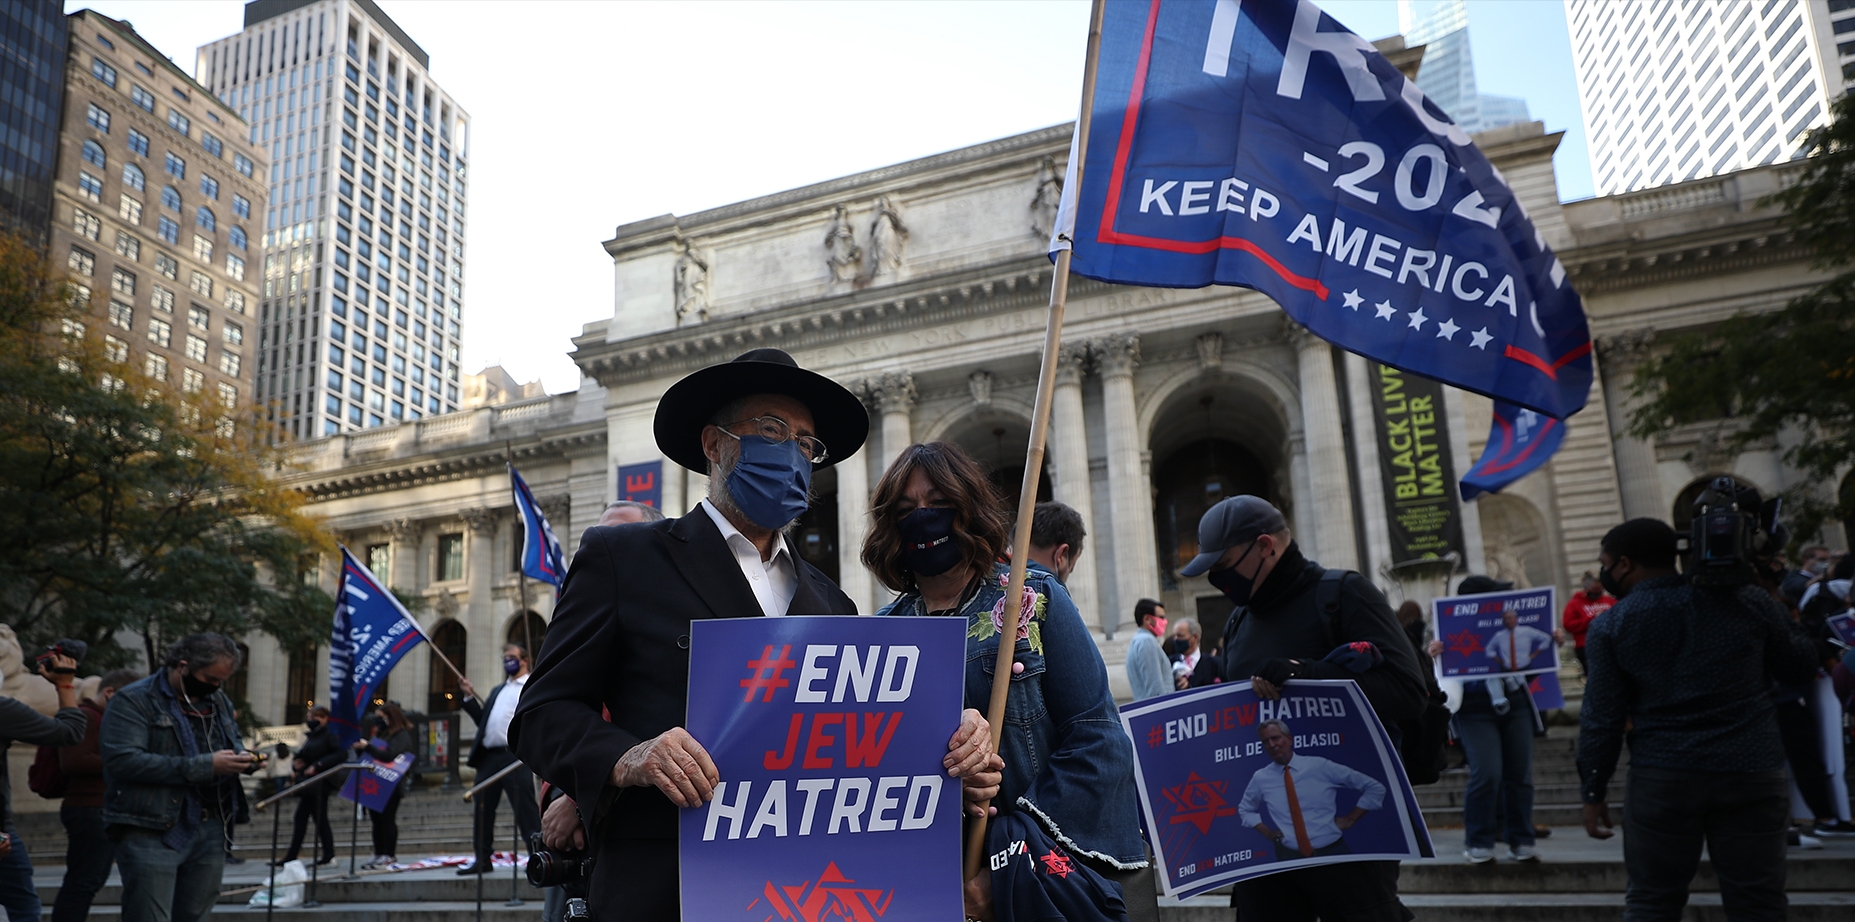 Jews are gathered in front of the New York Public Library on 5th Ave. to protest anti-semitism as ‘End Jew Hatred’ in Manhattan of New York City, United States on October 15, 2020. (Tayfun Coskun/Getty)